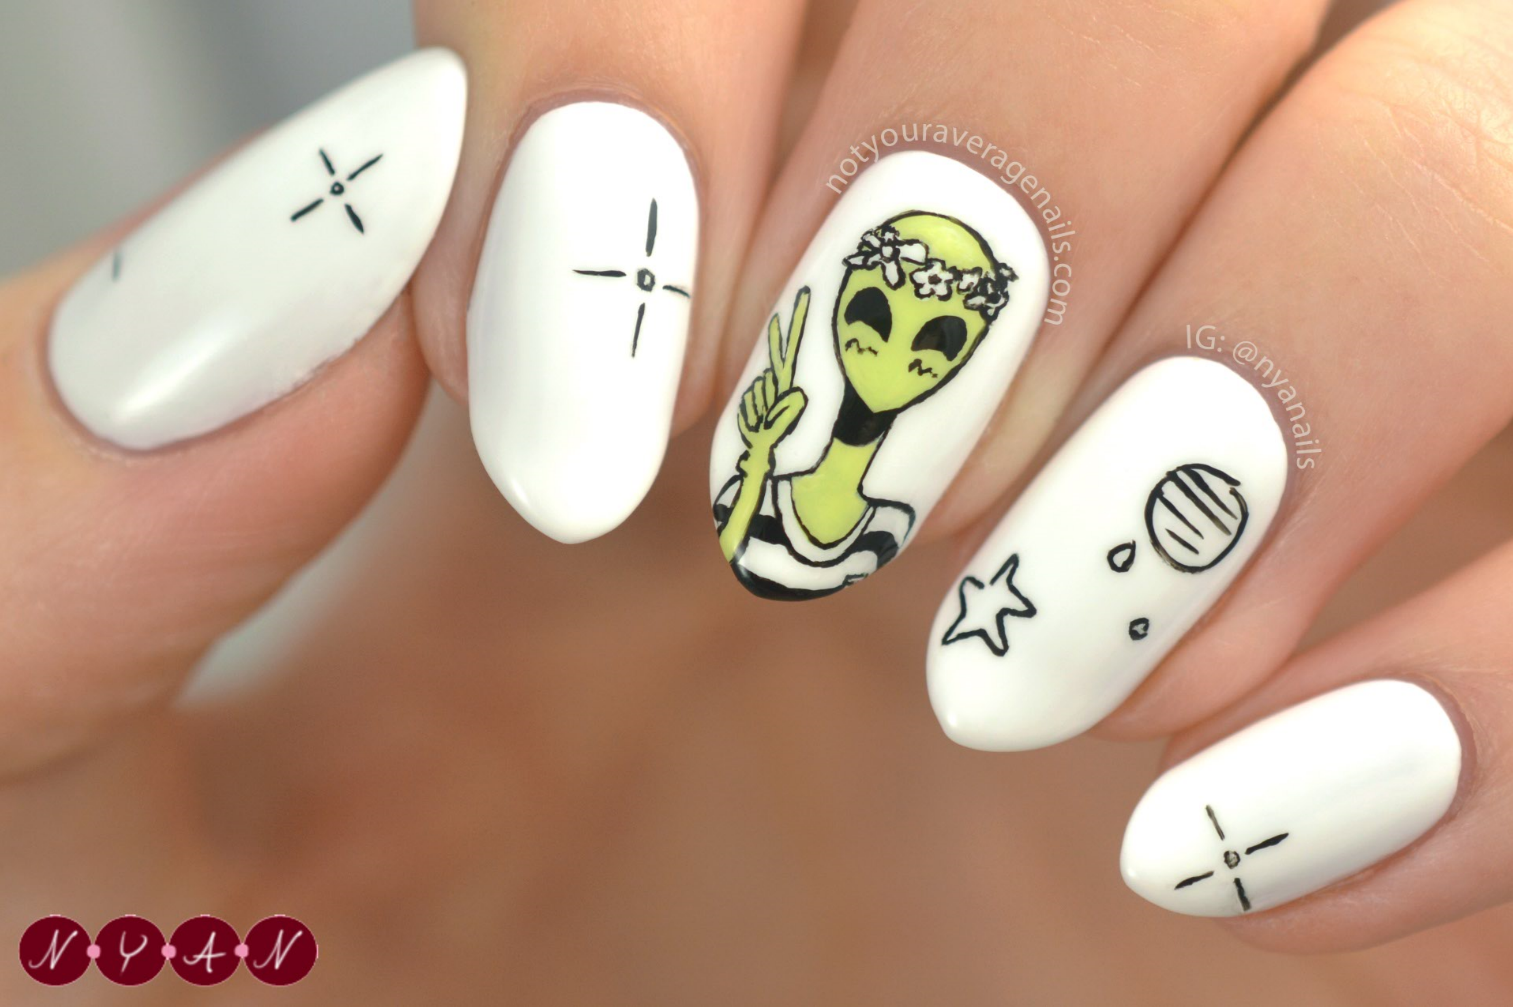 2. Extraterrestrial Nail Designs - wide 8